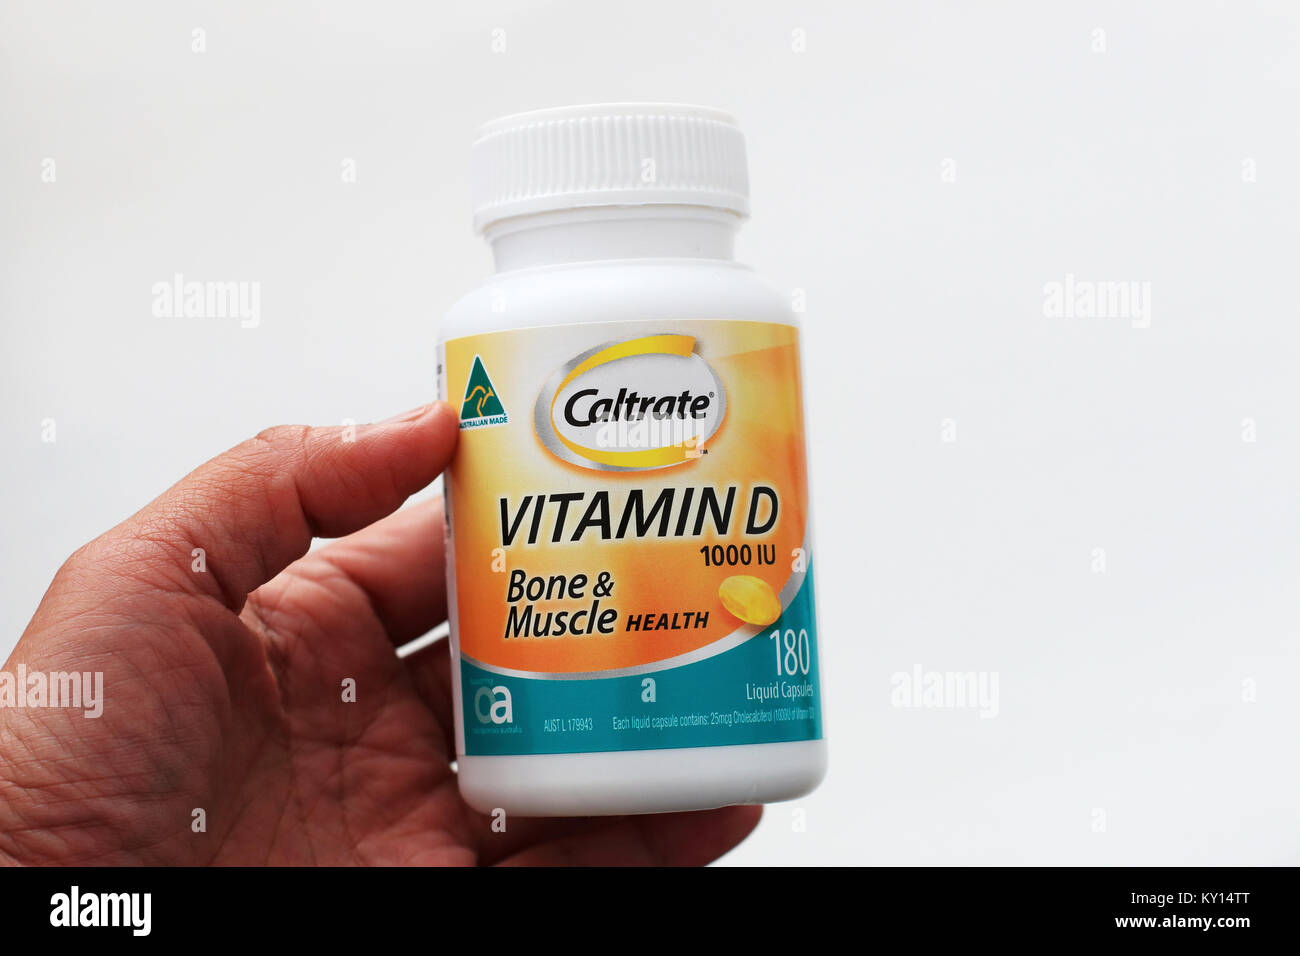 NOT ACTUAL VITAMIN. This is STOCK PHOTO of Caltrate Vitamin D 1000iu 300 Capsules isolated against white background Stock Photo